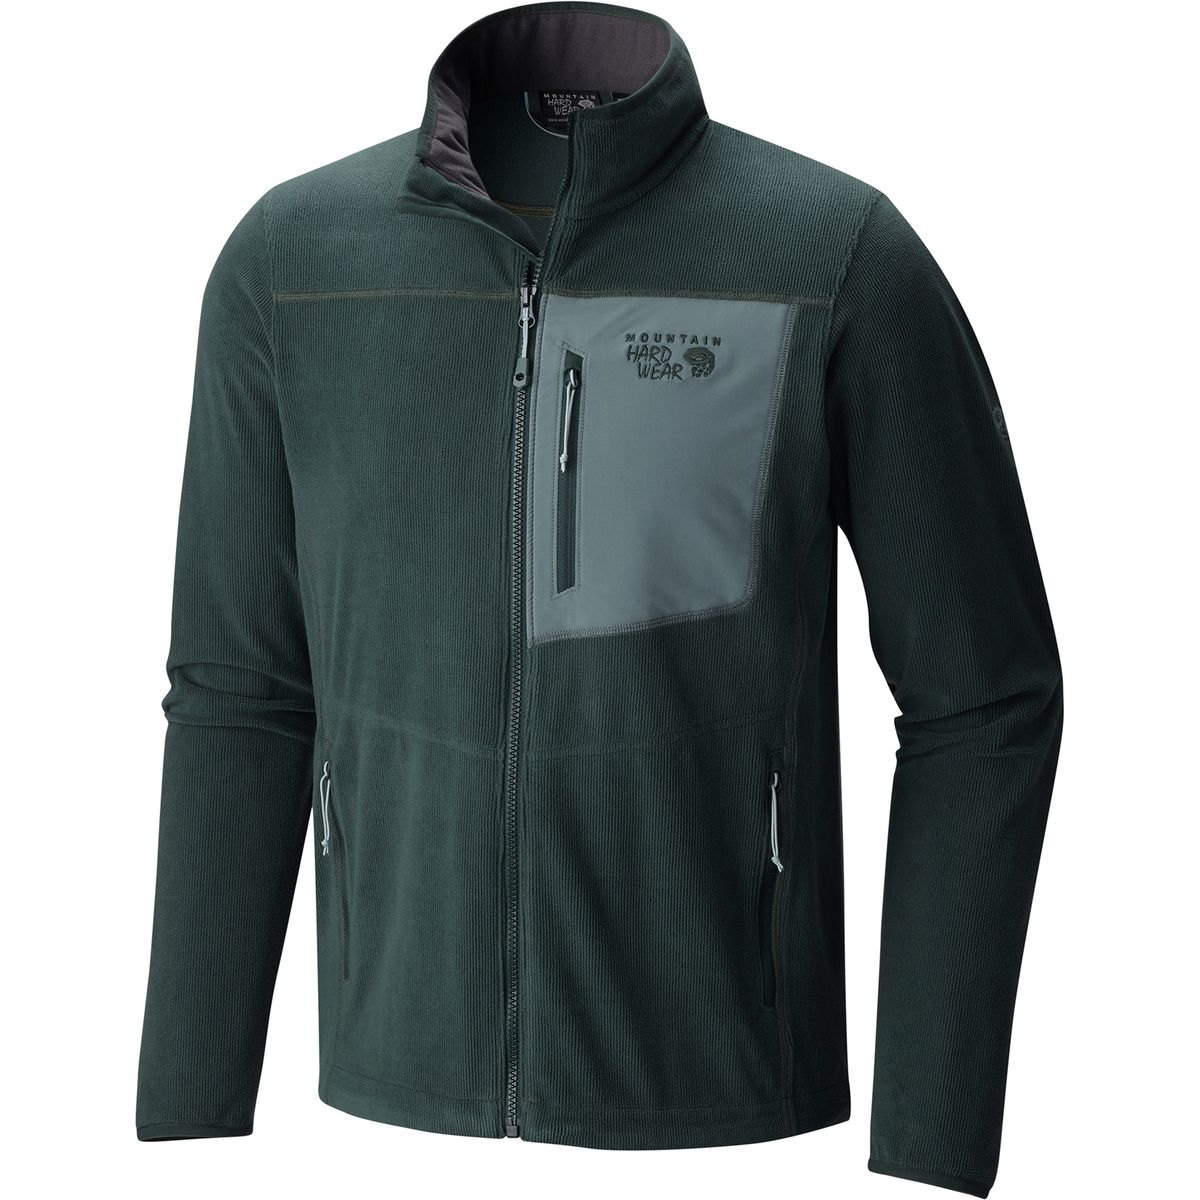 Fleece Jackets - The Insulating Layer - Mid Layer